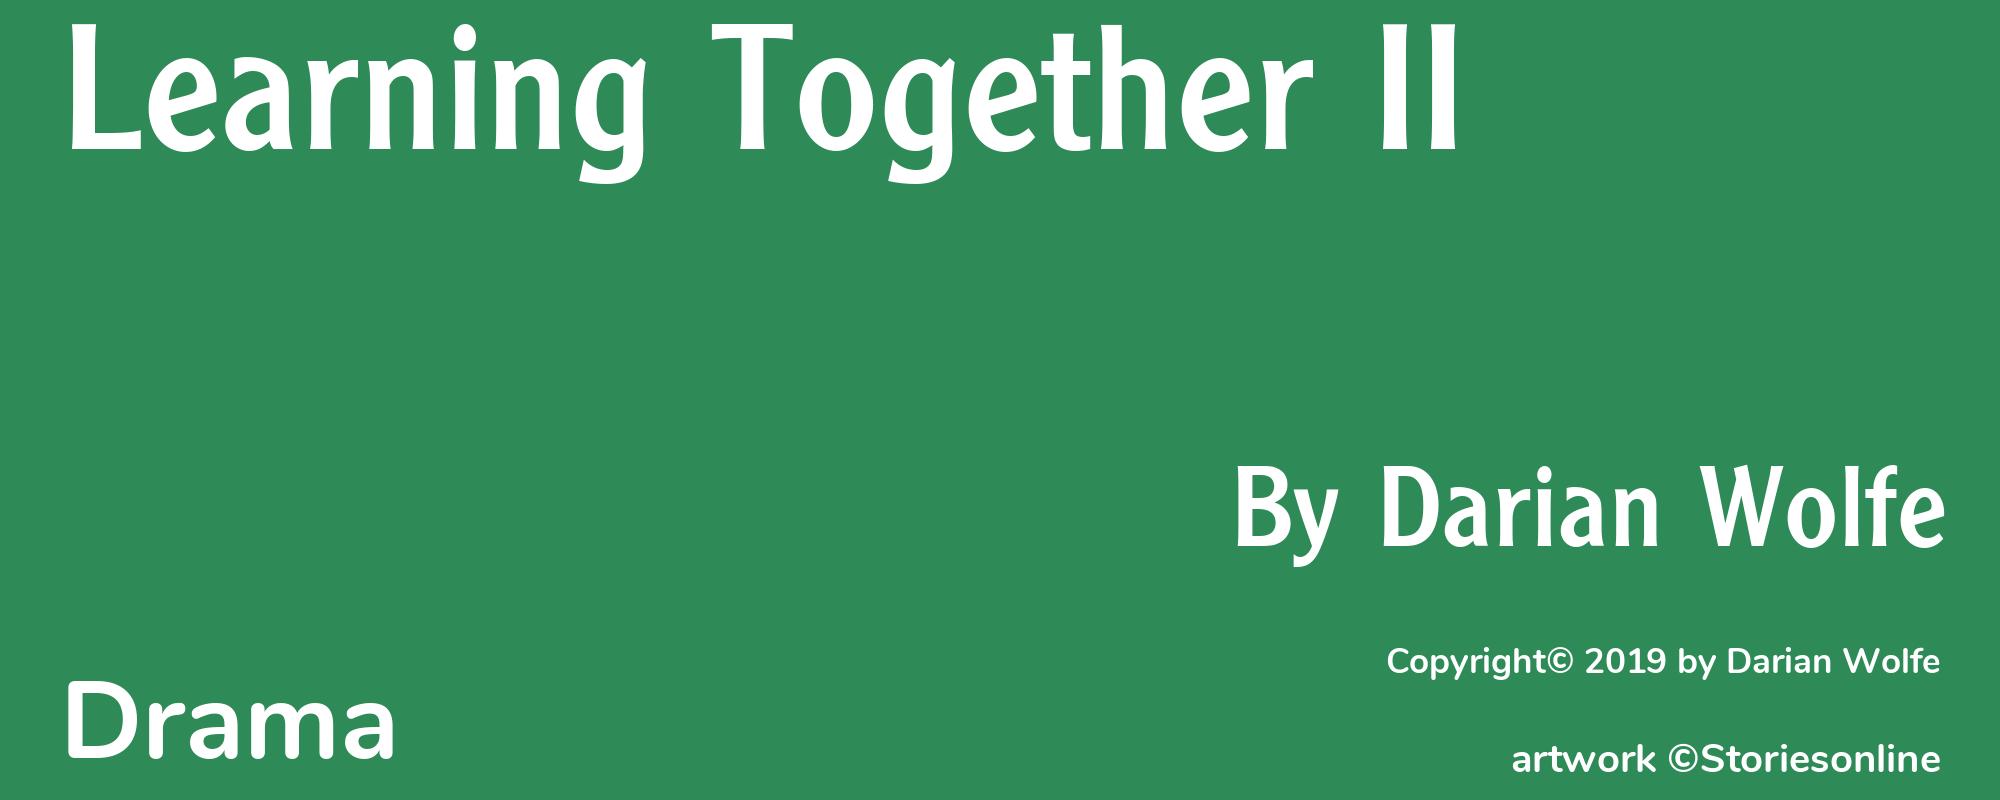 Learning Together II - Cover